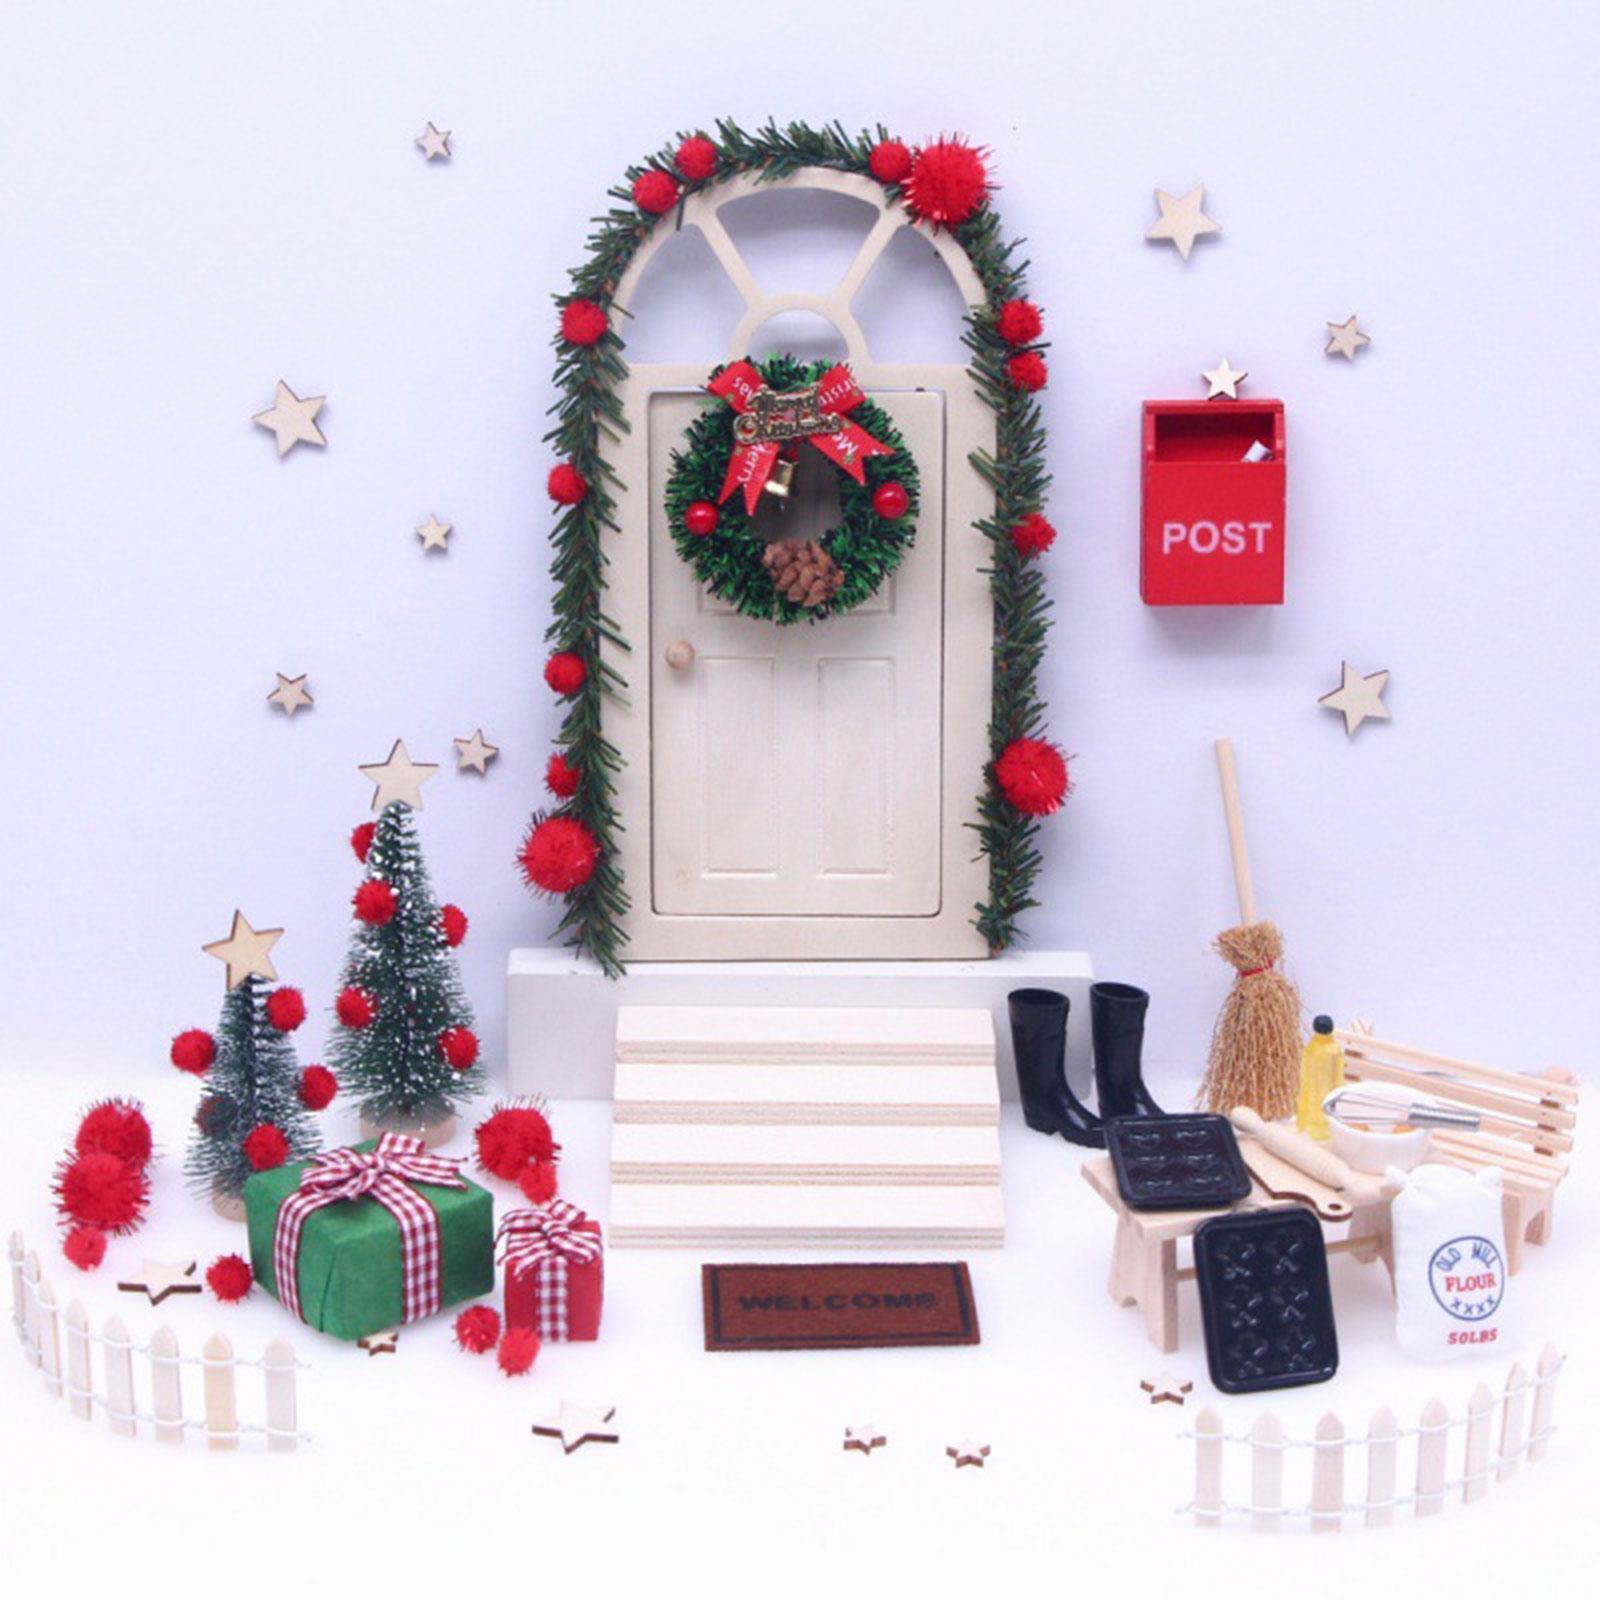 27Pcs Tiny Fairy Wooden Doors Xmas Miniature Decorations, 1:12 Doll House Scene Props for Railroad Architectural